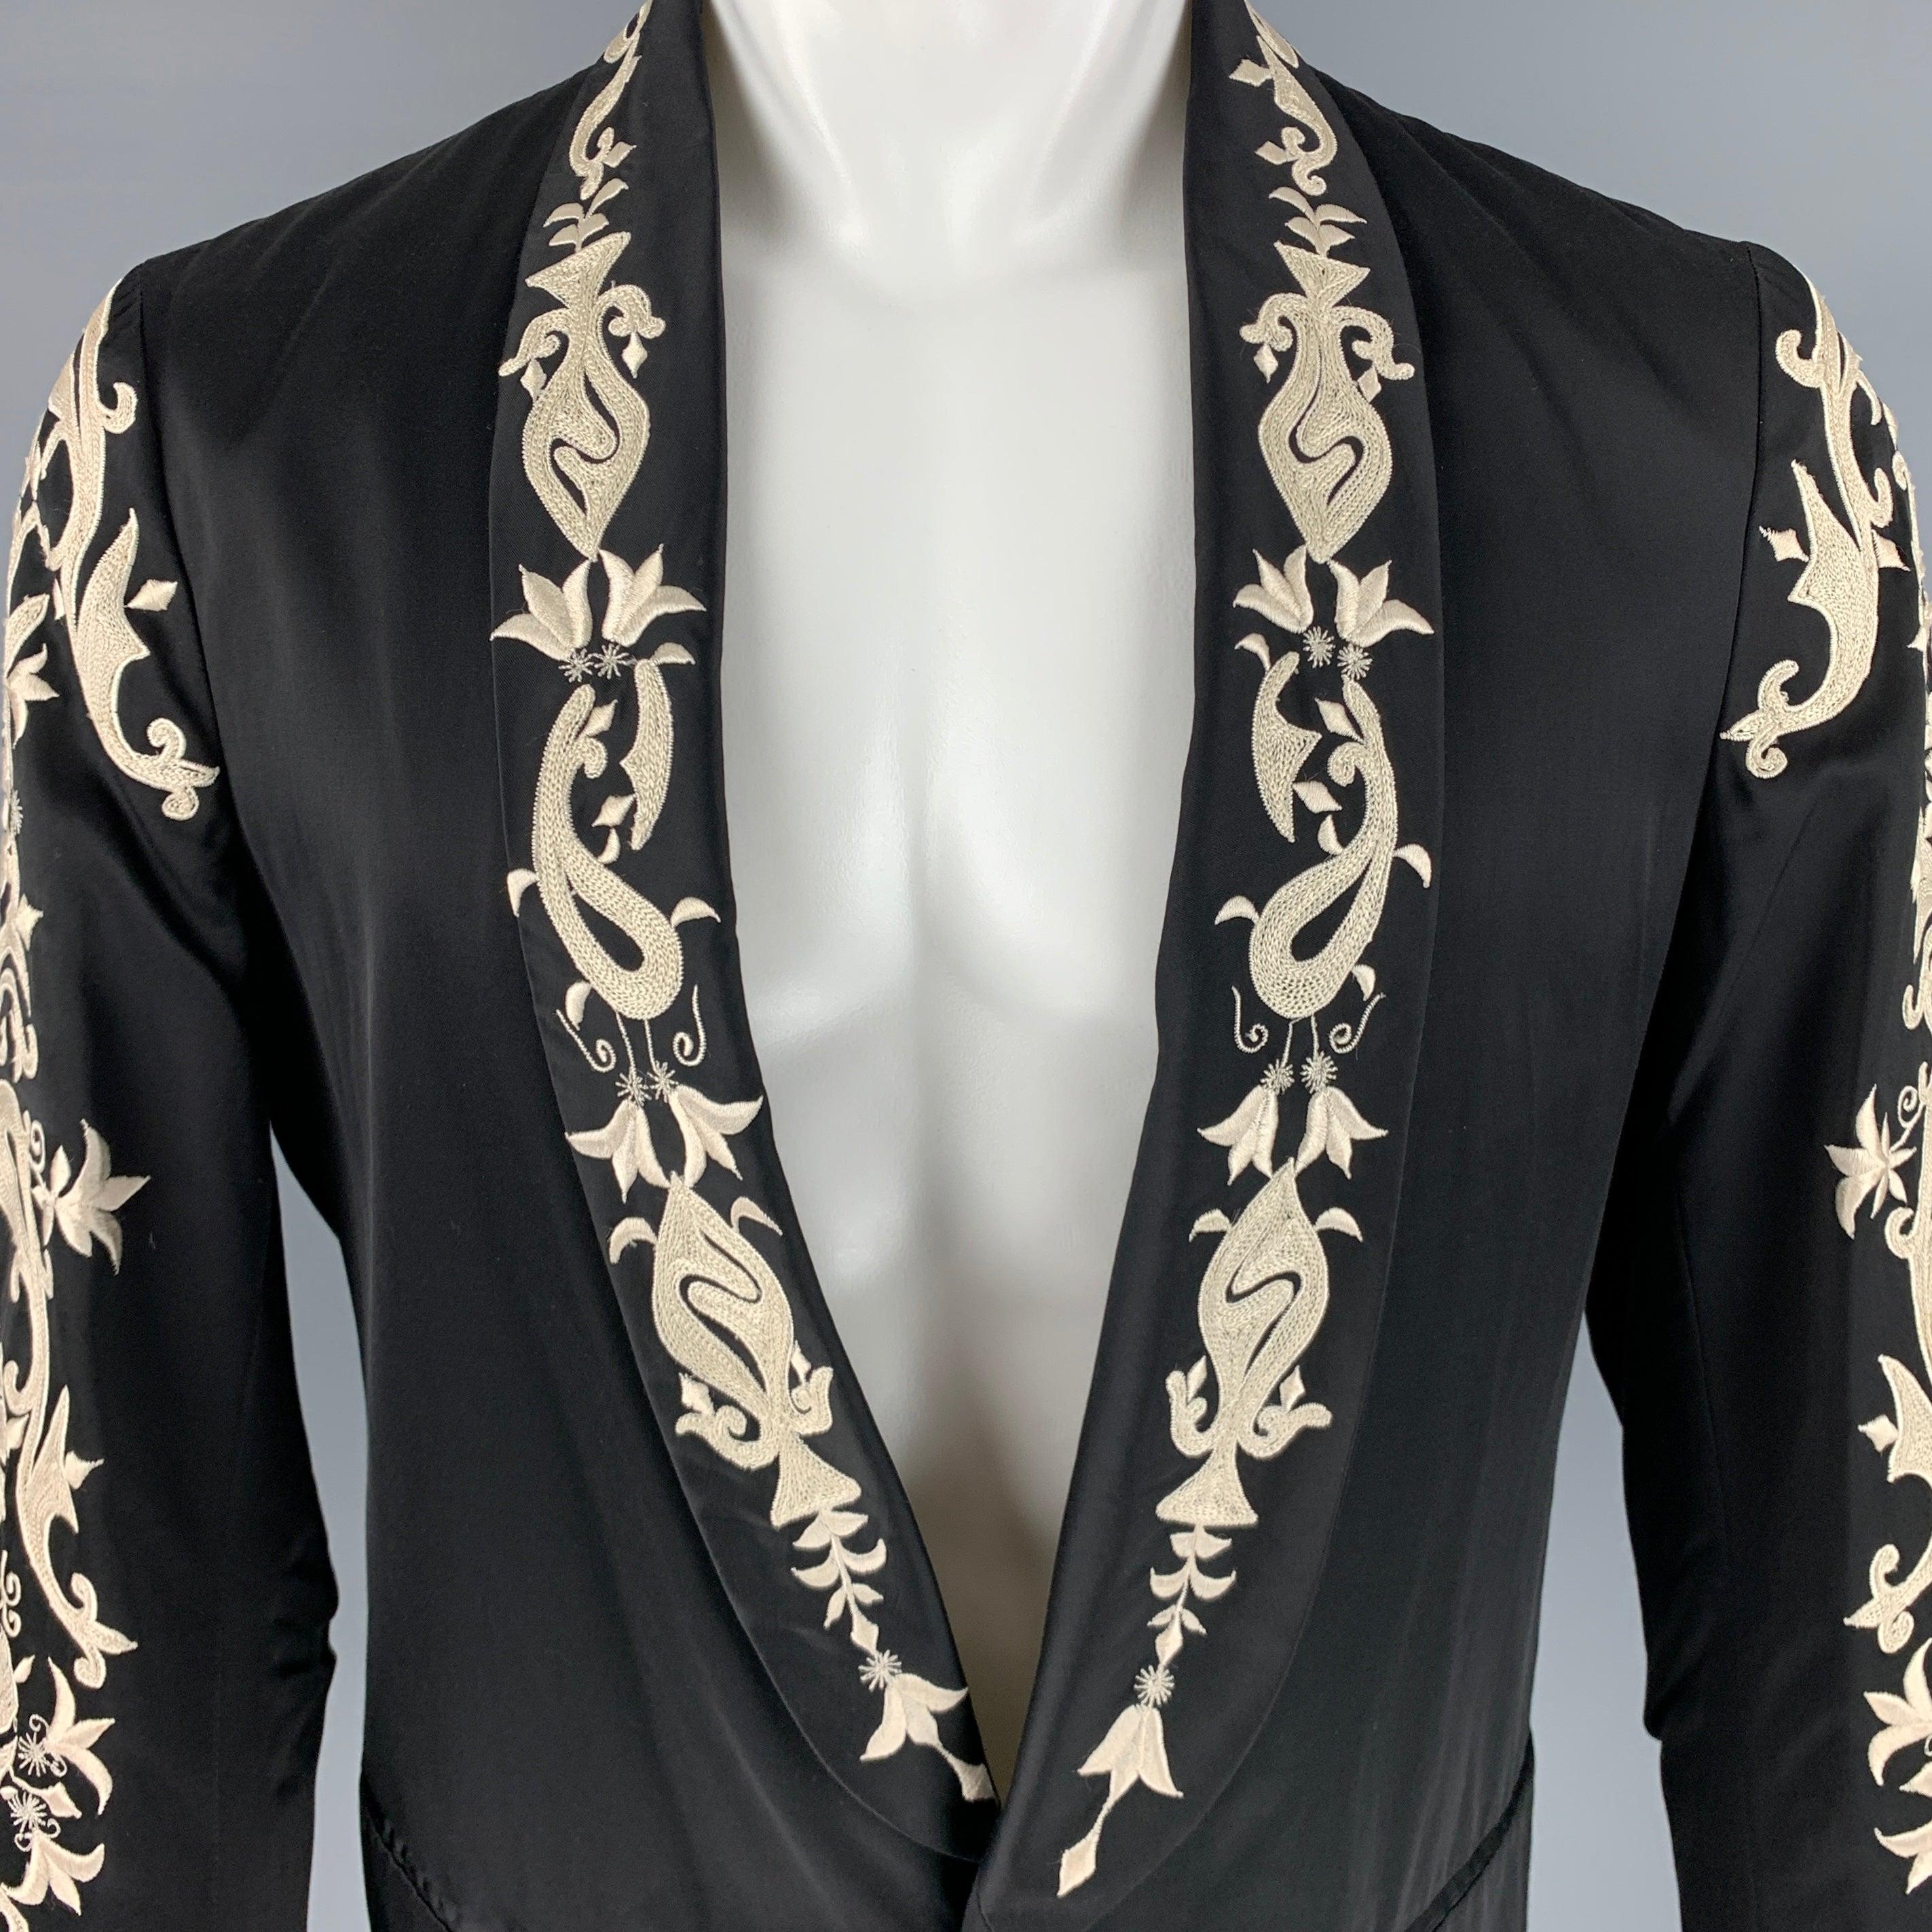 DRIES VAN NOTEN sport coat
in a black viscose cotton blend fabric featuring cream floral embroidery on lapel and sleeves, shawl collar, and single button closure. Made in Belgium.Excellent Pre-Owned Condition. 

Marked:   48 

Measurements: 
